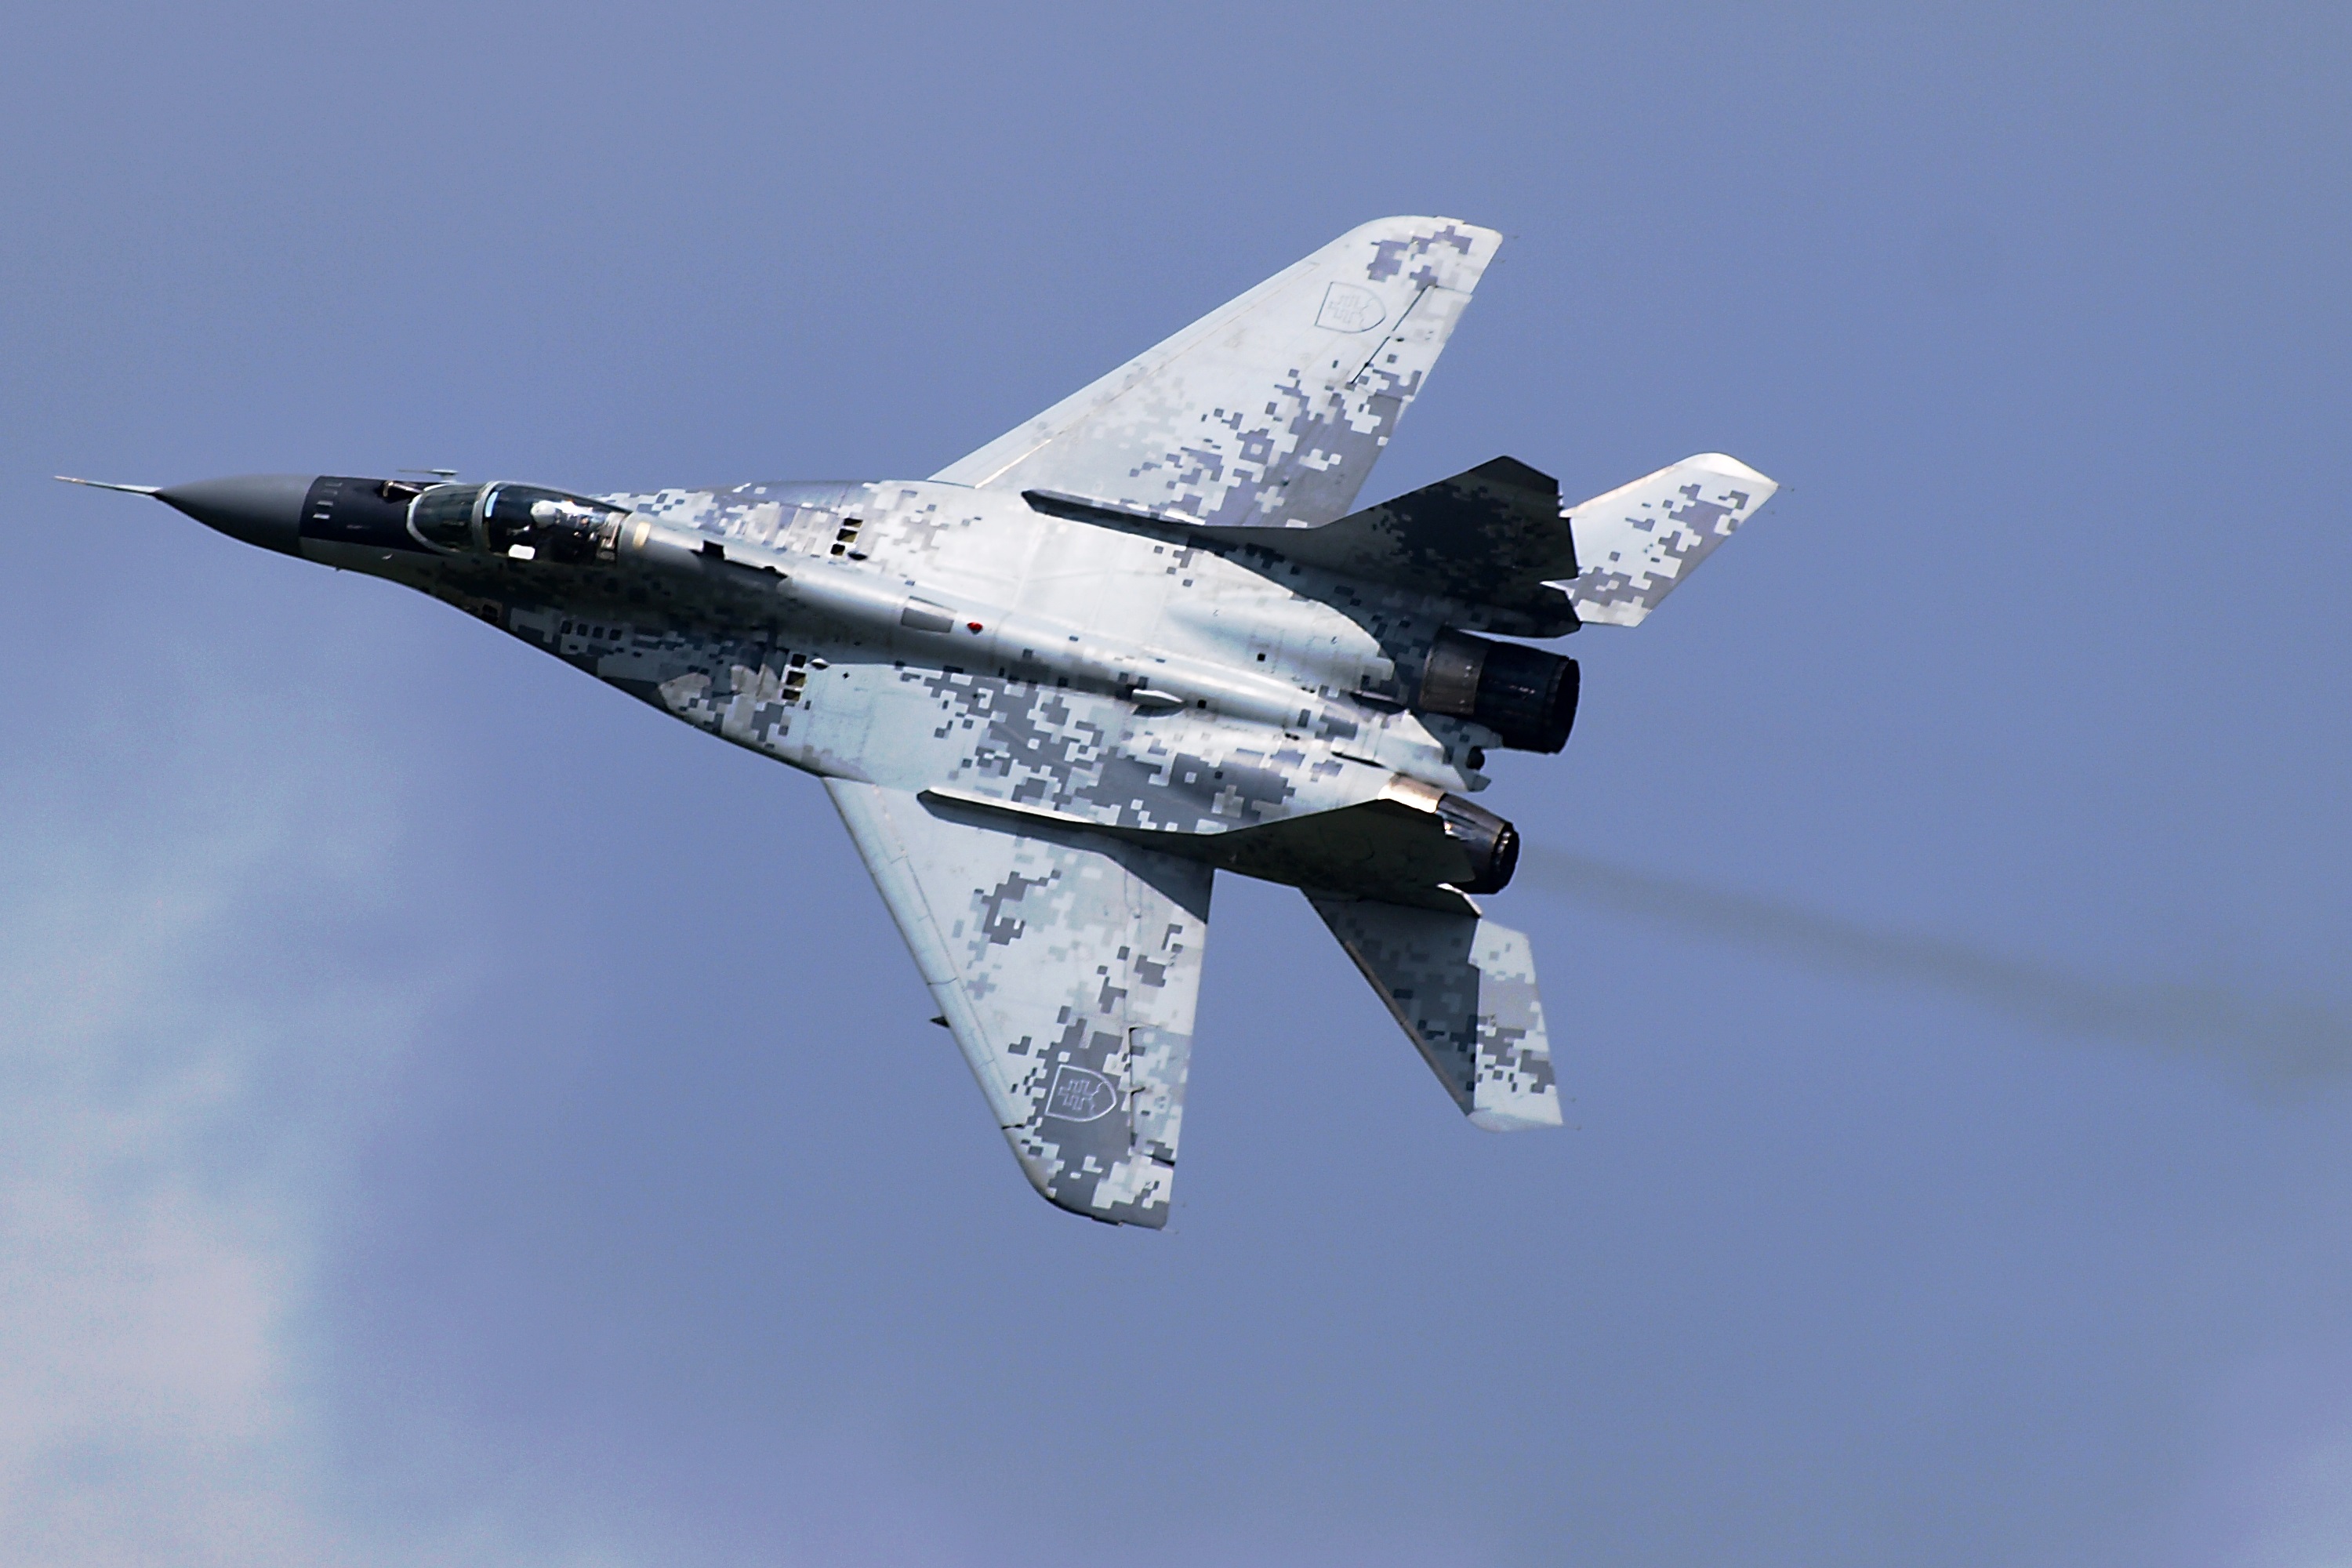 Slovakia To Hand Over MiG-29 Fighter Jets, Kub Air Defense Systems To Ukraine